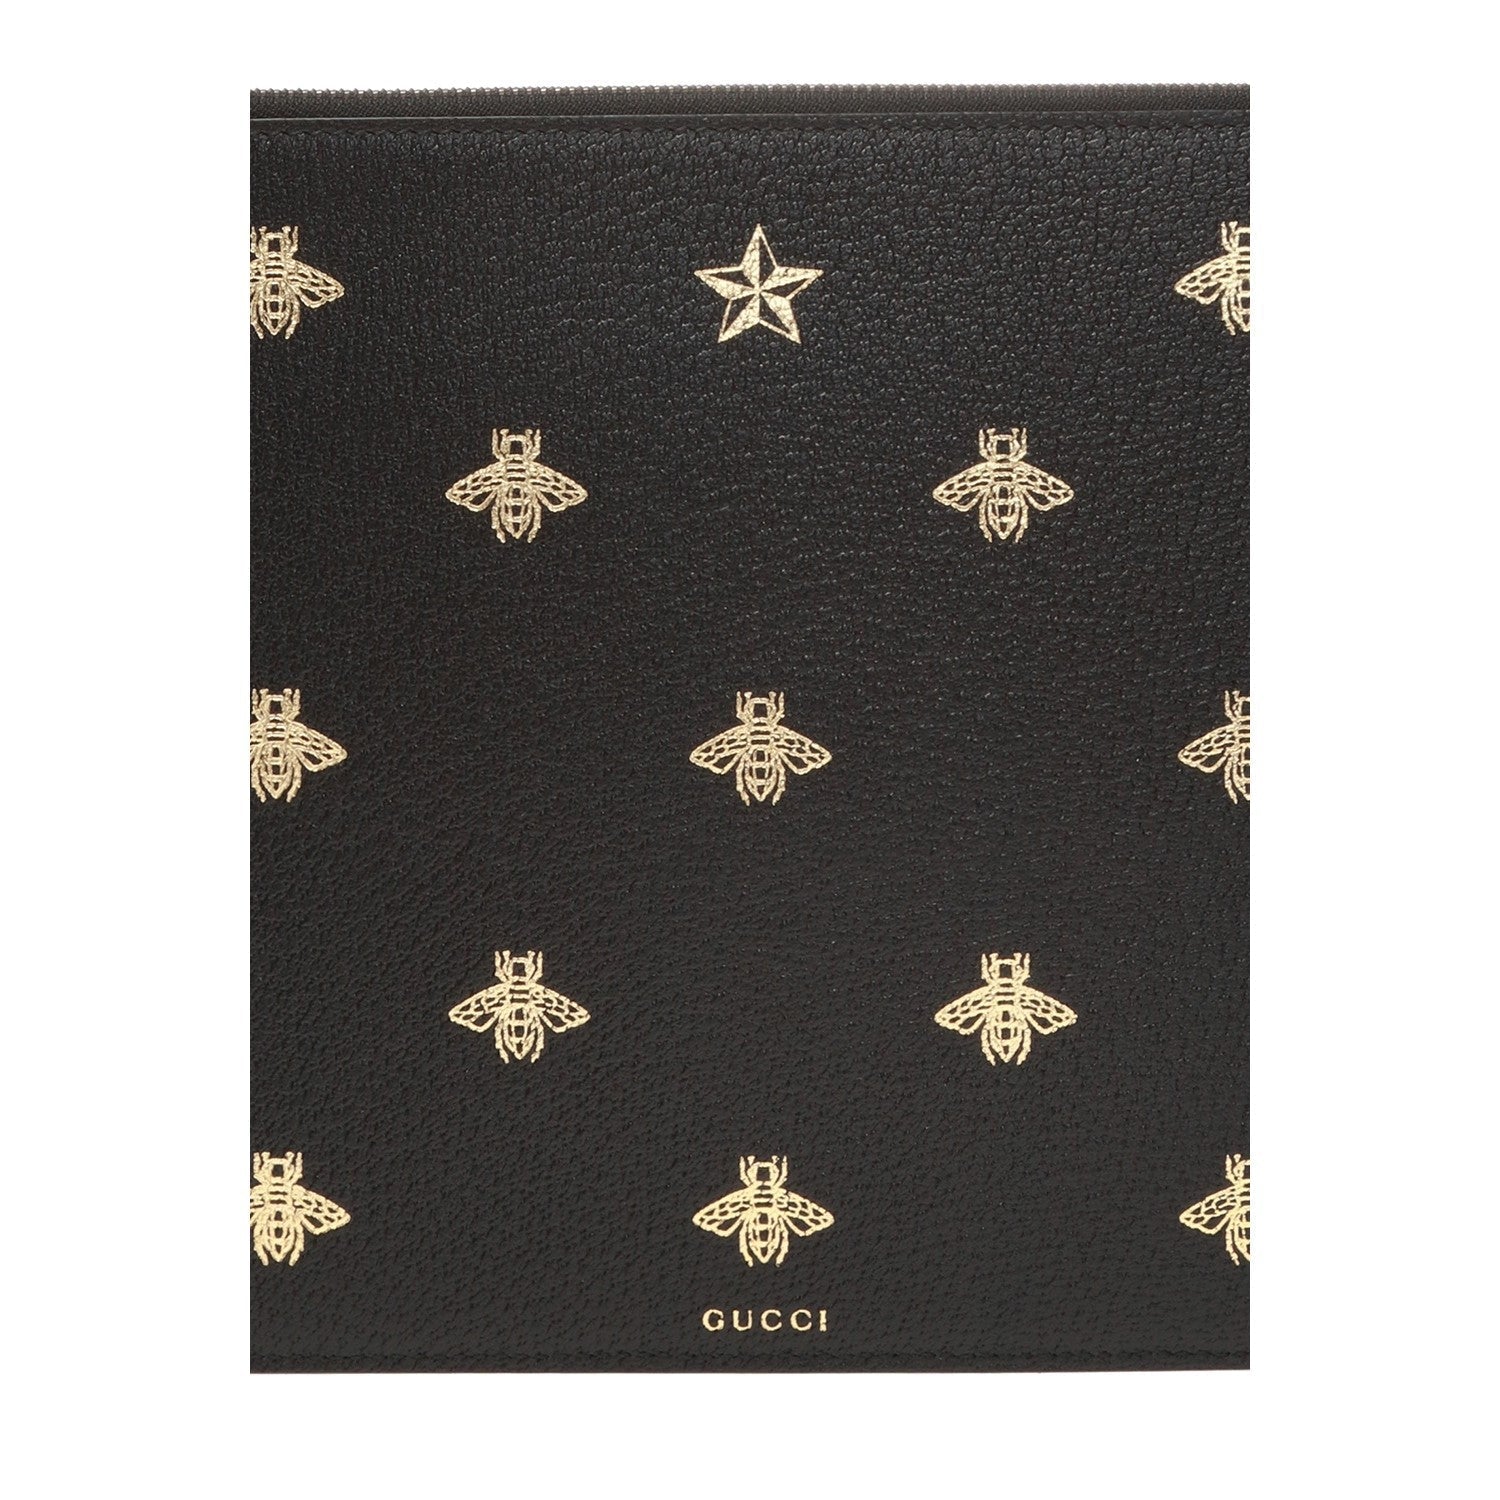 Gucci Black Leather Bee Star Motif Gold Pouch Wristlet Bag 495066 at_Queen_Bee_of_Beverly_Hills